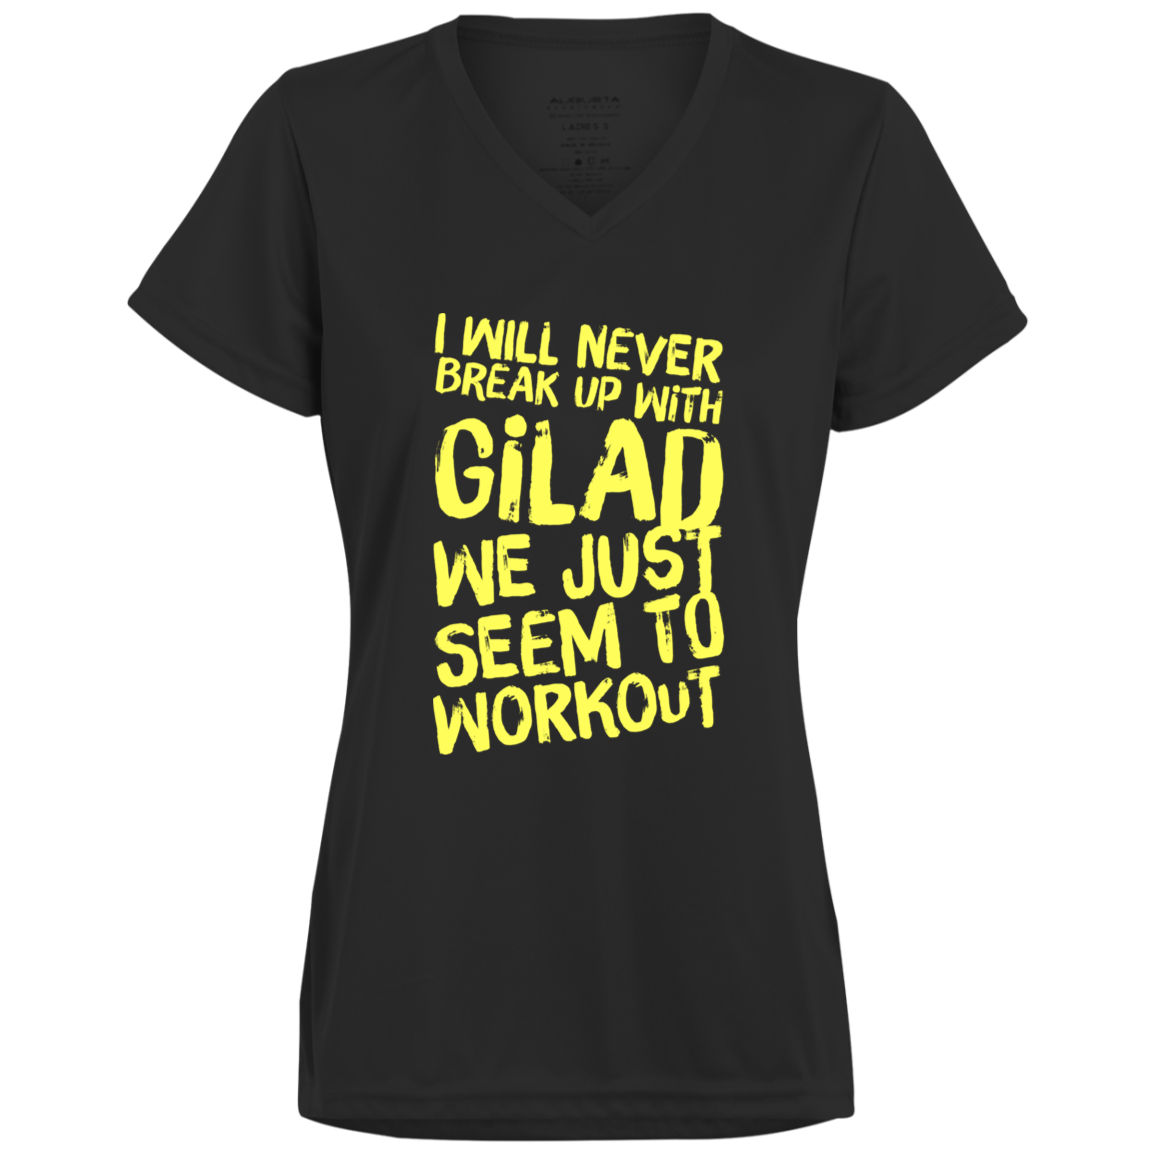 I will Never Break Up With Gilad Ladies’ Moisture-Wicking V-Neck Tee